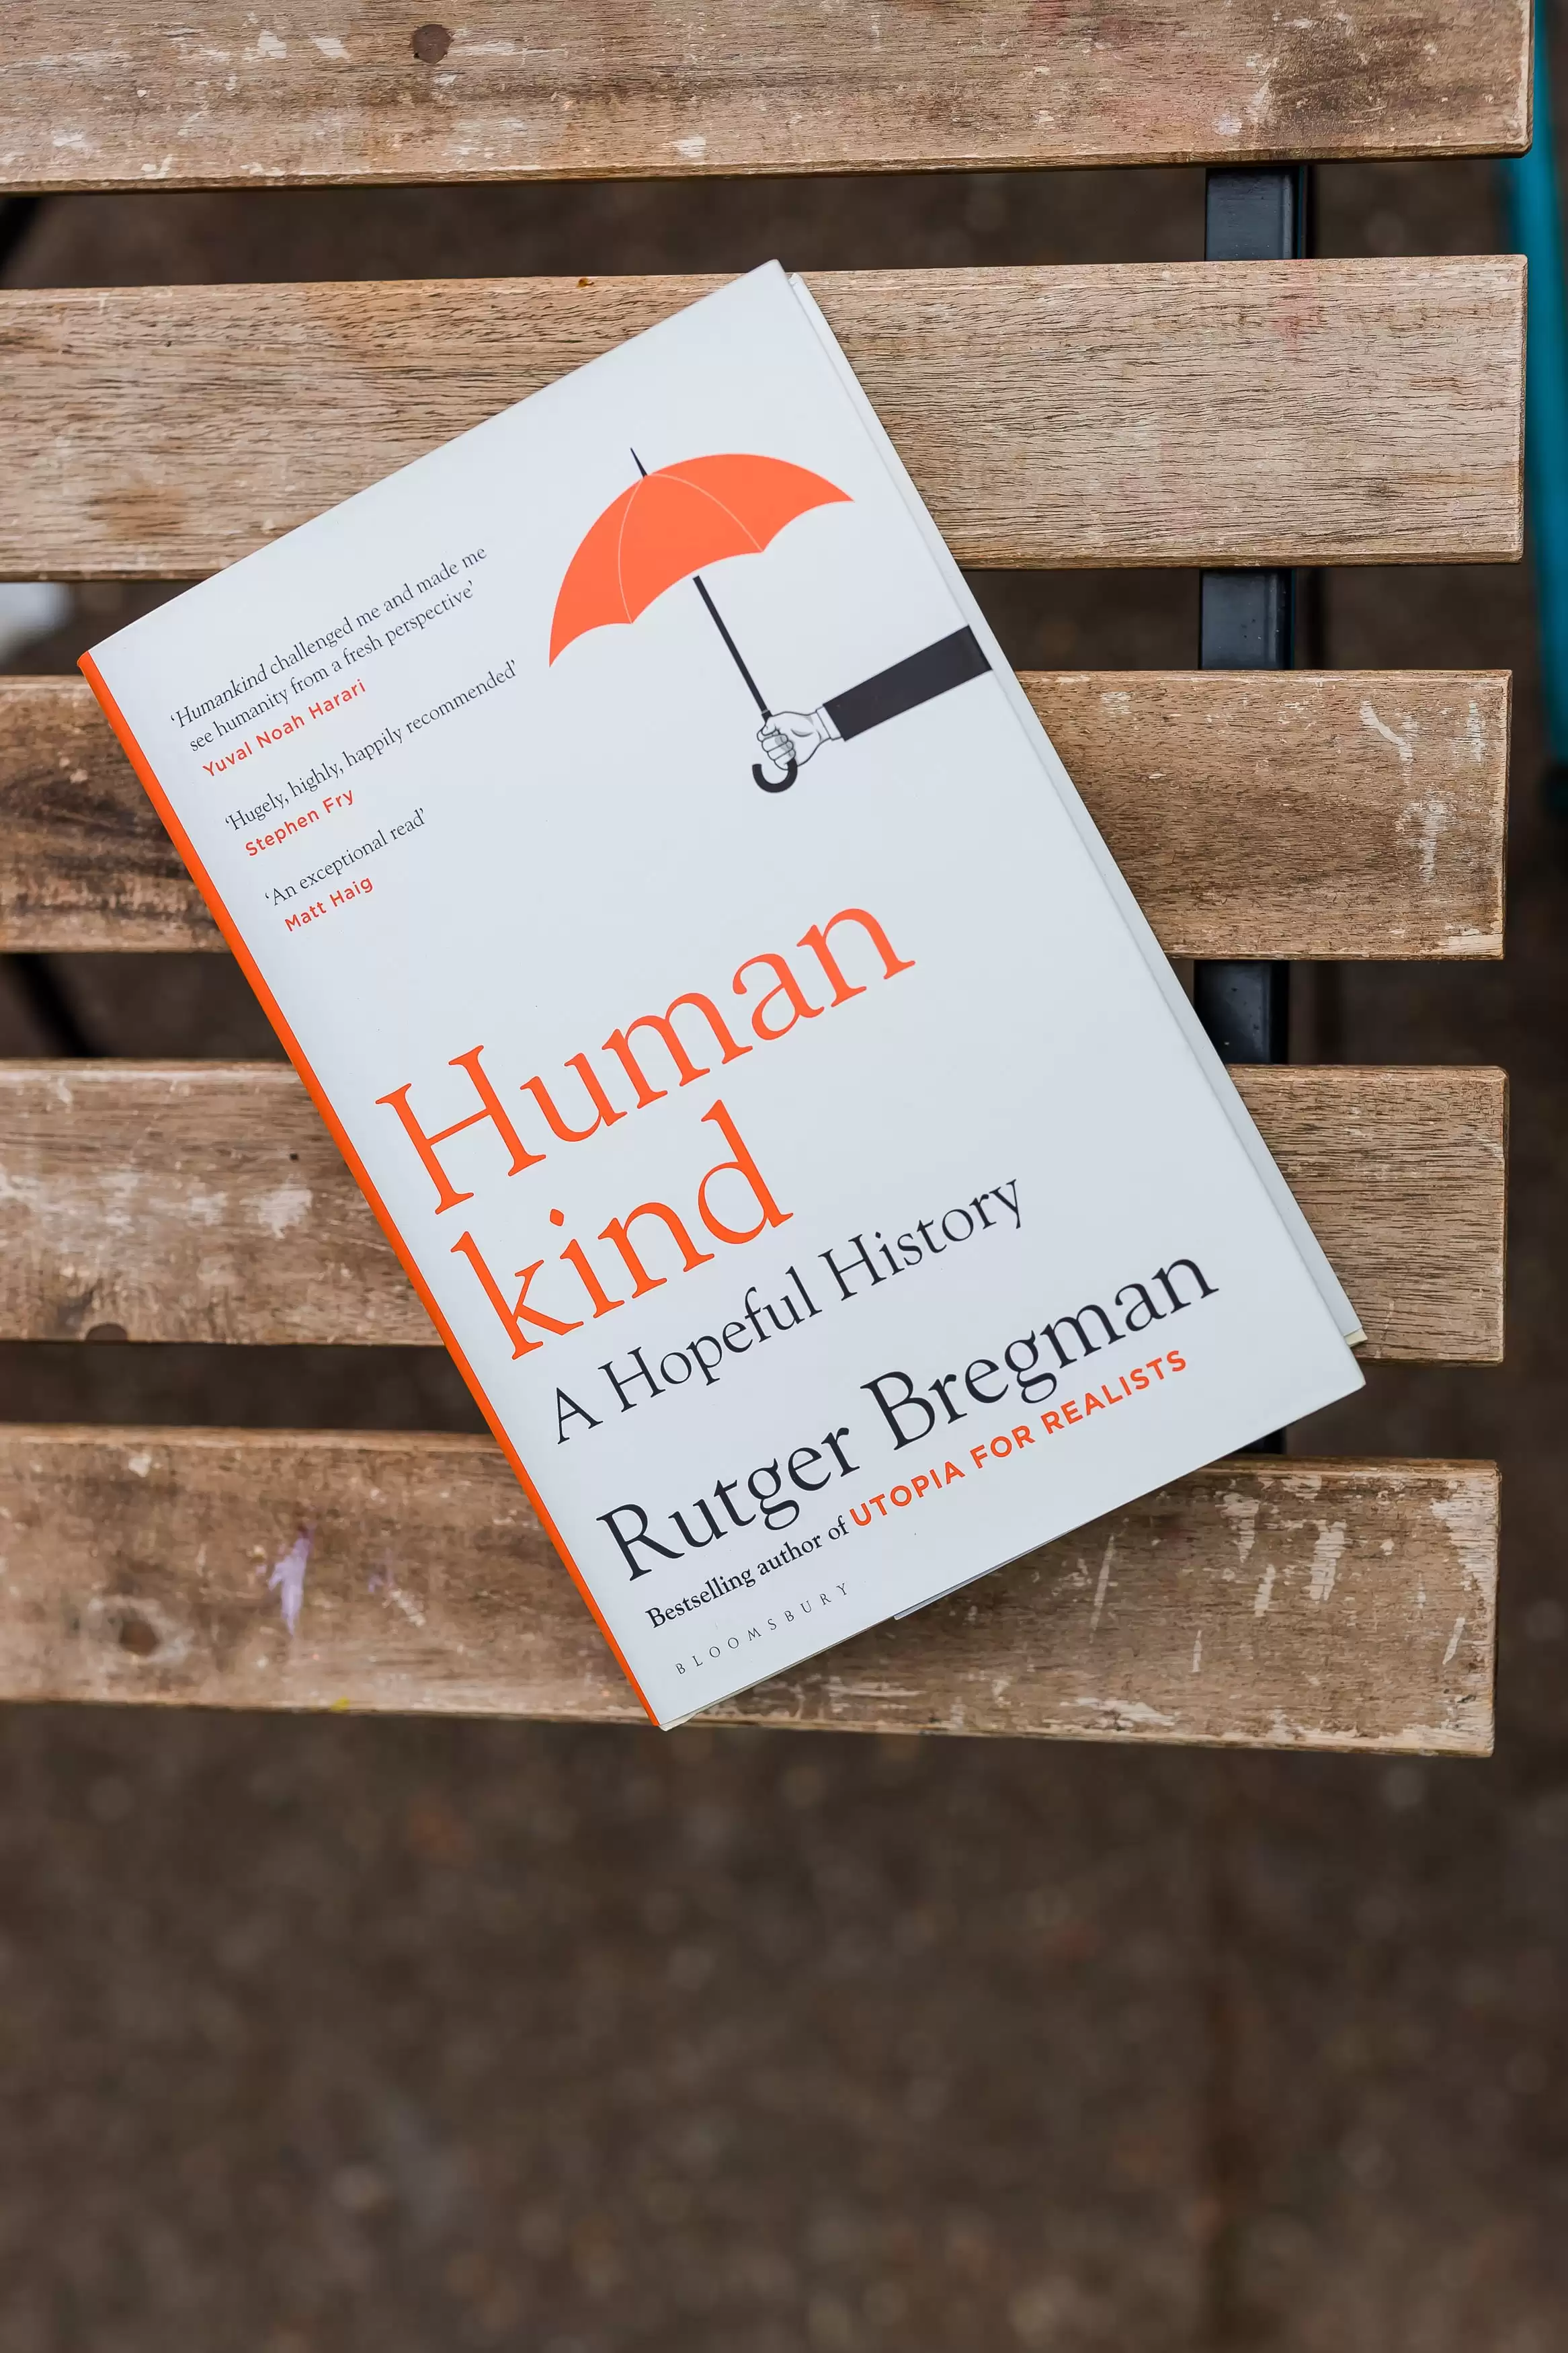 Human Kind Book by Rutger Bregman lay on a wooden bench